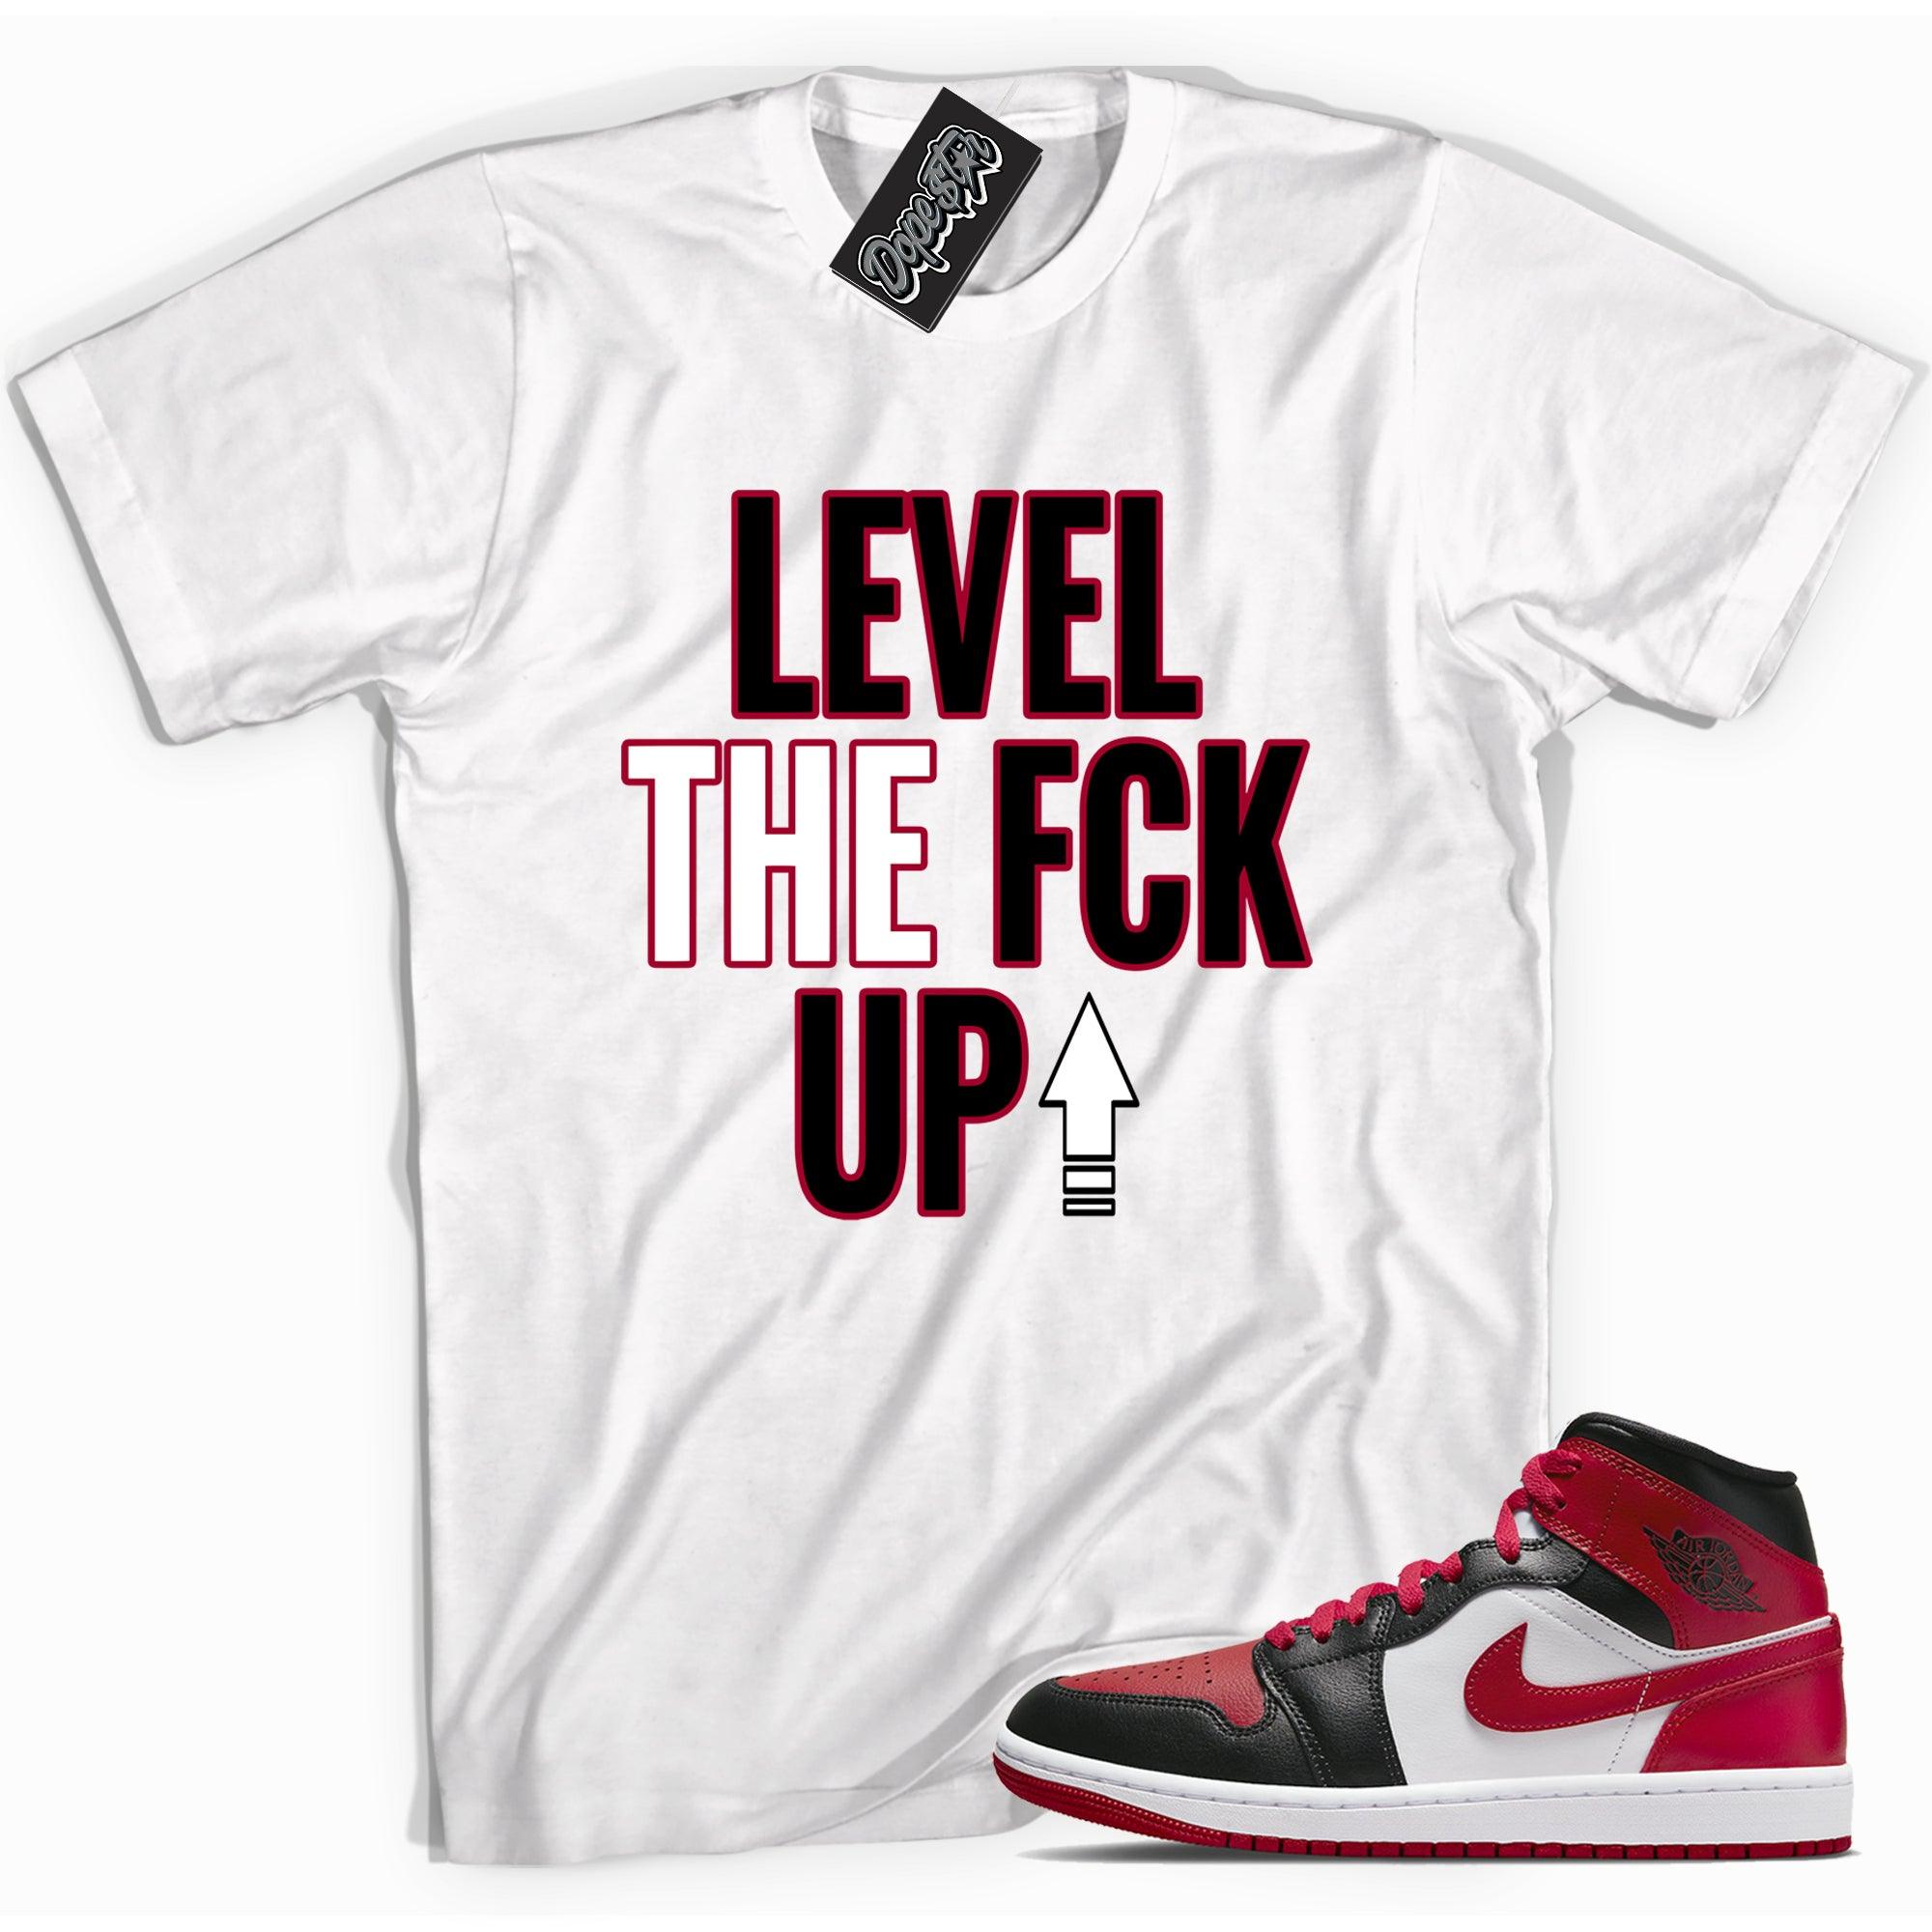 Cool white graphic tee with 'Level Up' print, that perfectly matches Air Jordan 1 Miid Alternate Bred Toe sneakers.